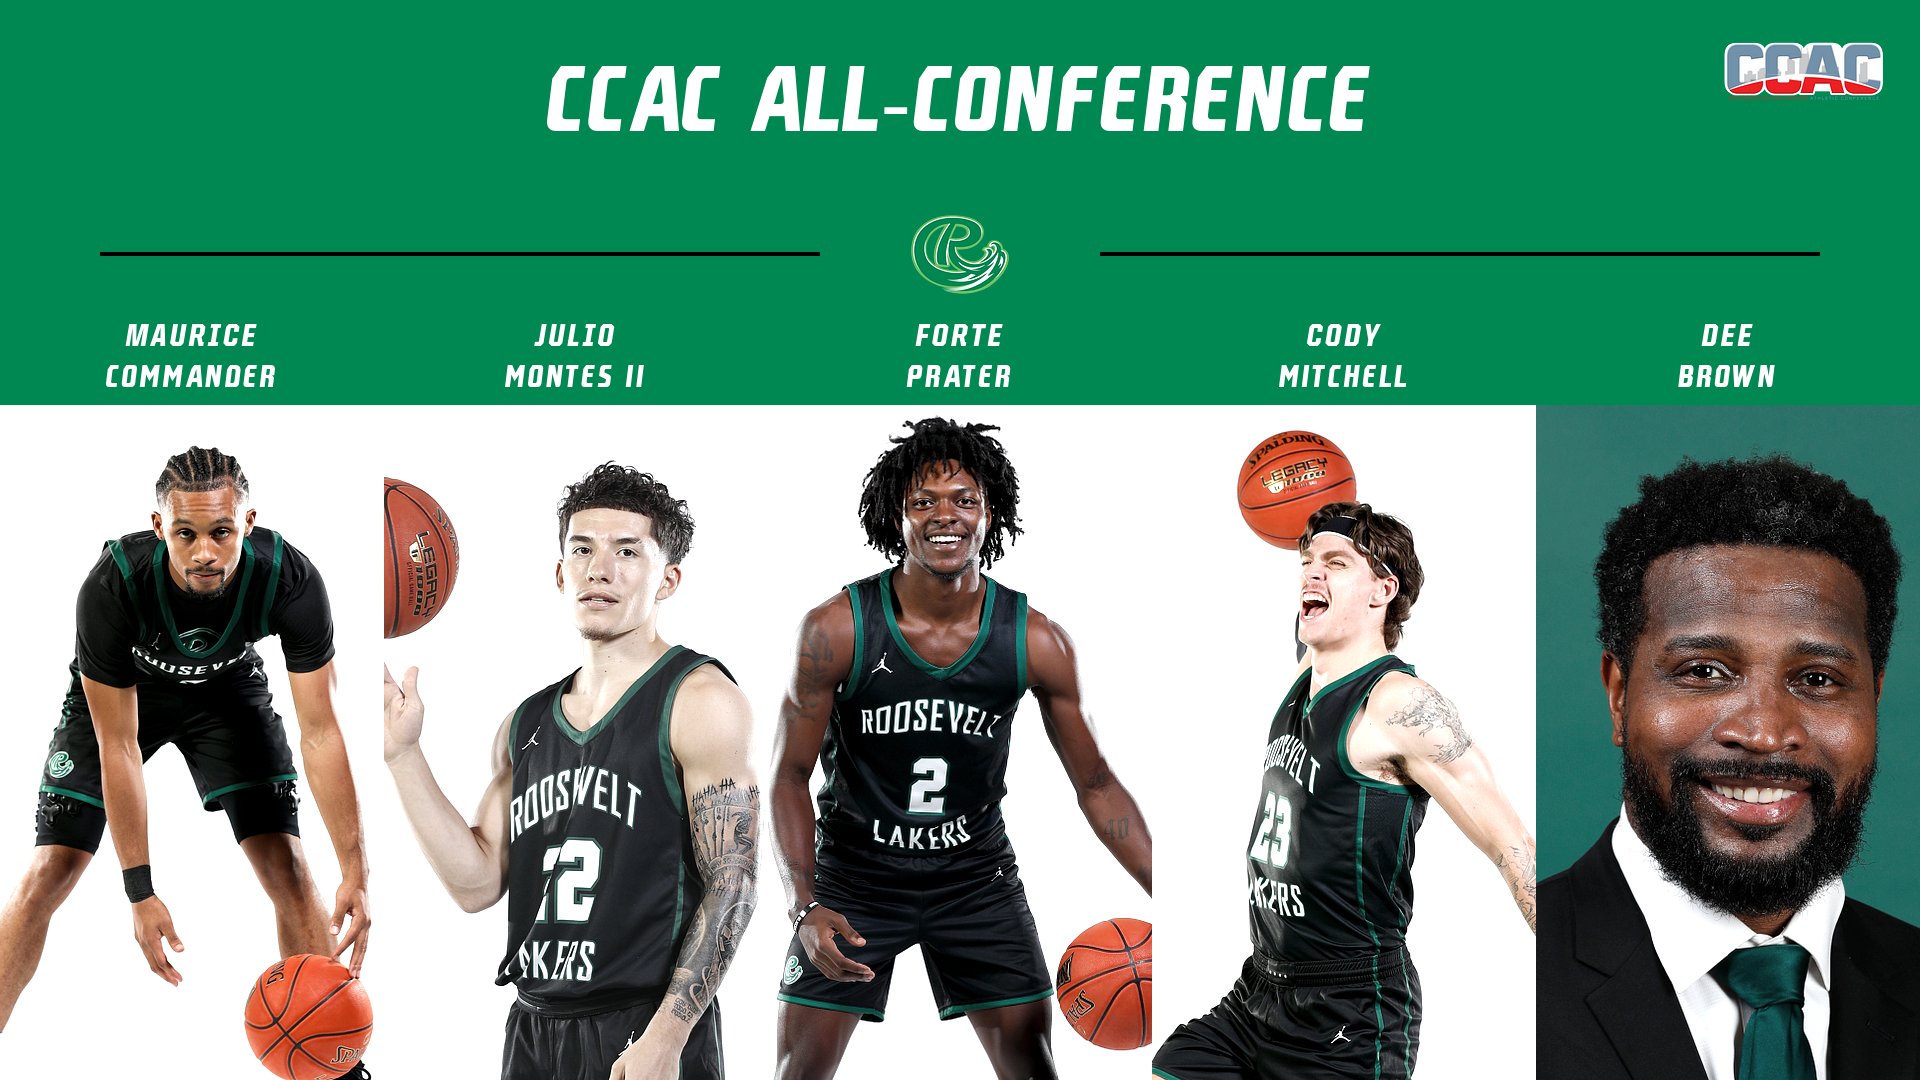 Lakers Place Four On All-CCAC Squads, Brown Named Coach of Year